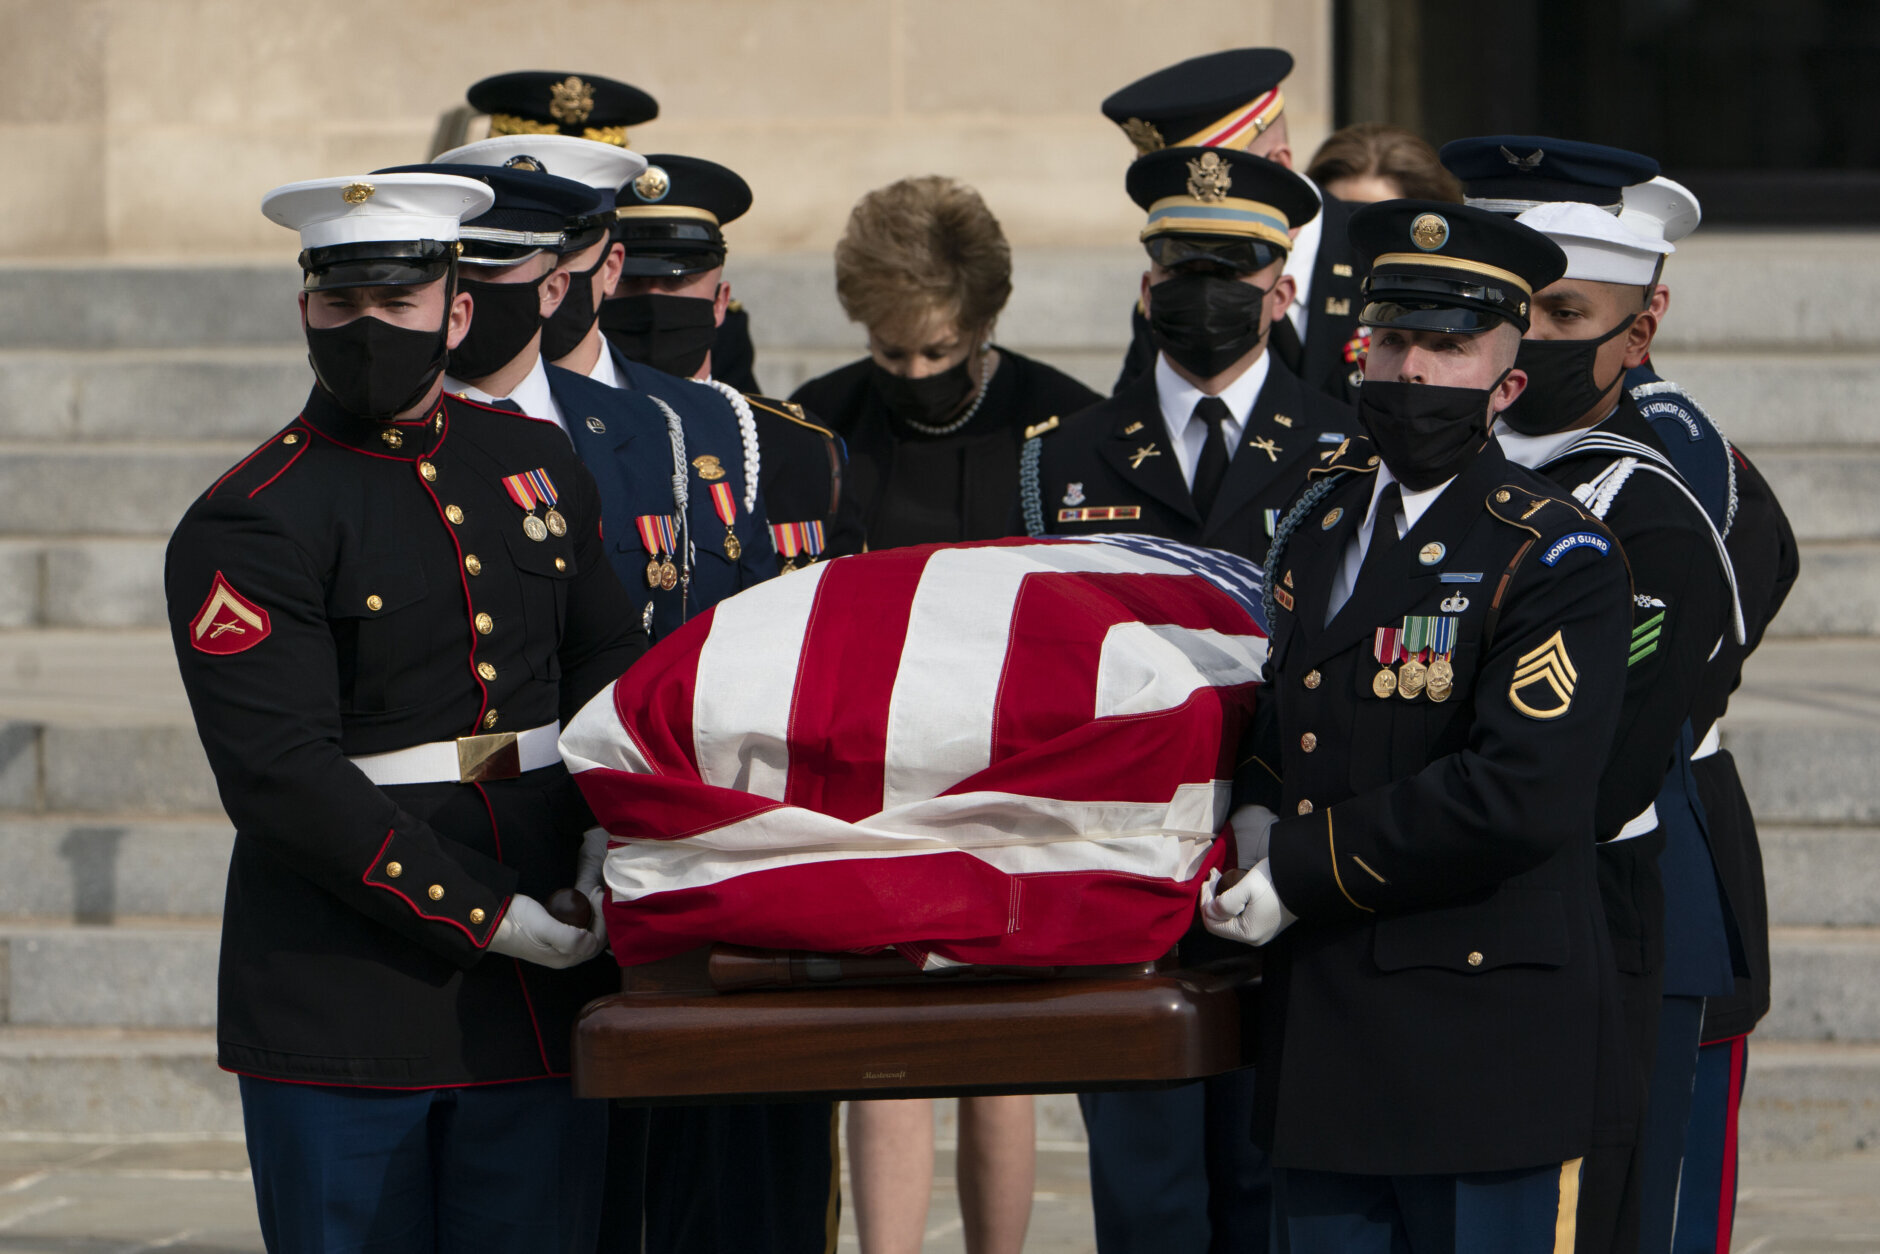 Former Sen. Elizabeth Dole, center, walks behind the flag-draped casket of her husband, former Sen. Bob Dole of Kansas, as it is carried from the Washington National Cathedral following a funeral service, Friday, Dec. 10, 2021, in Washington. (AP Photo/Manuel Balce Ceneta)